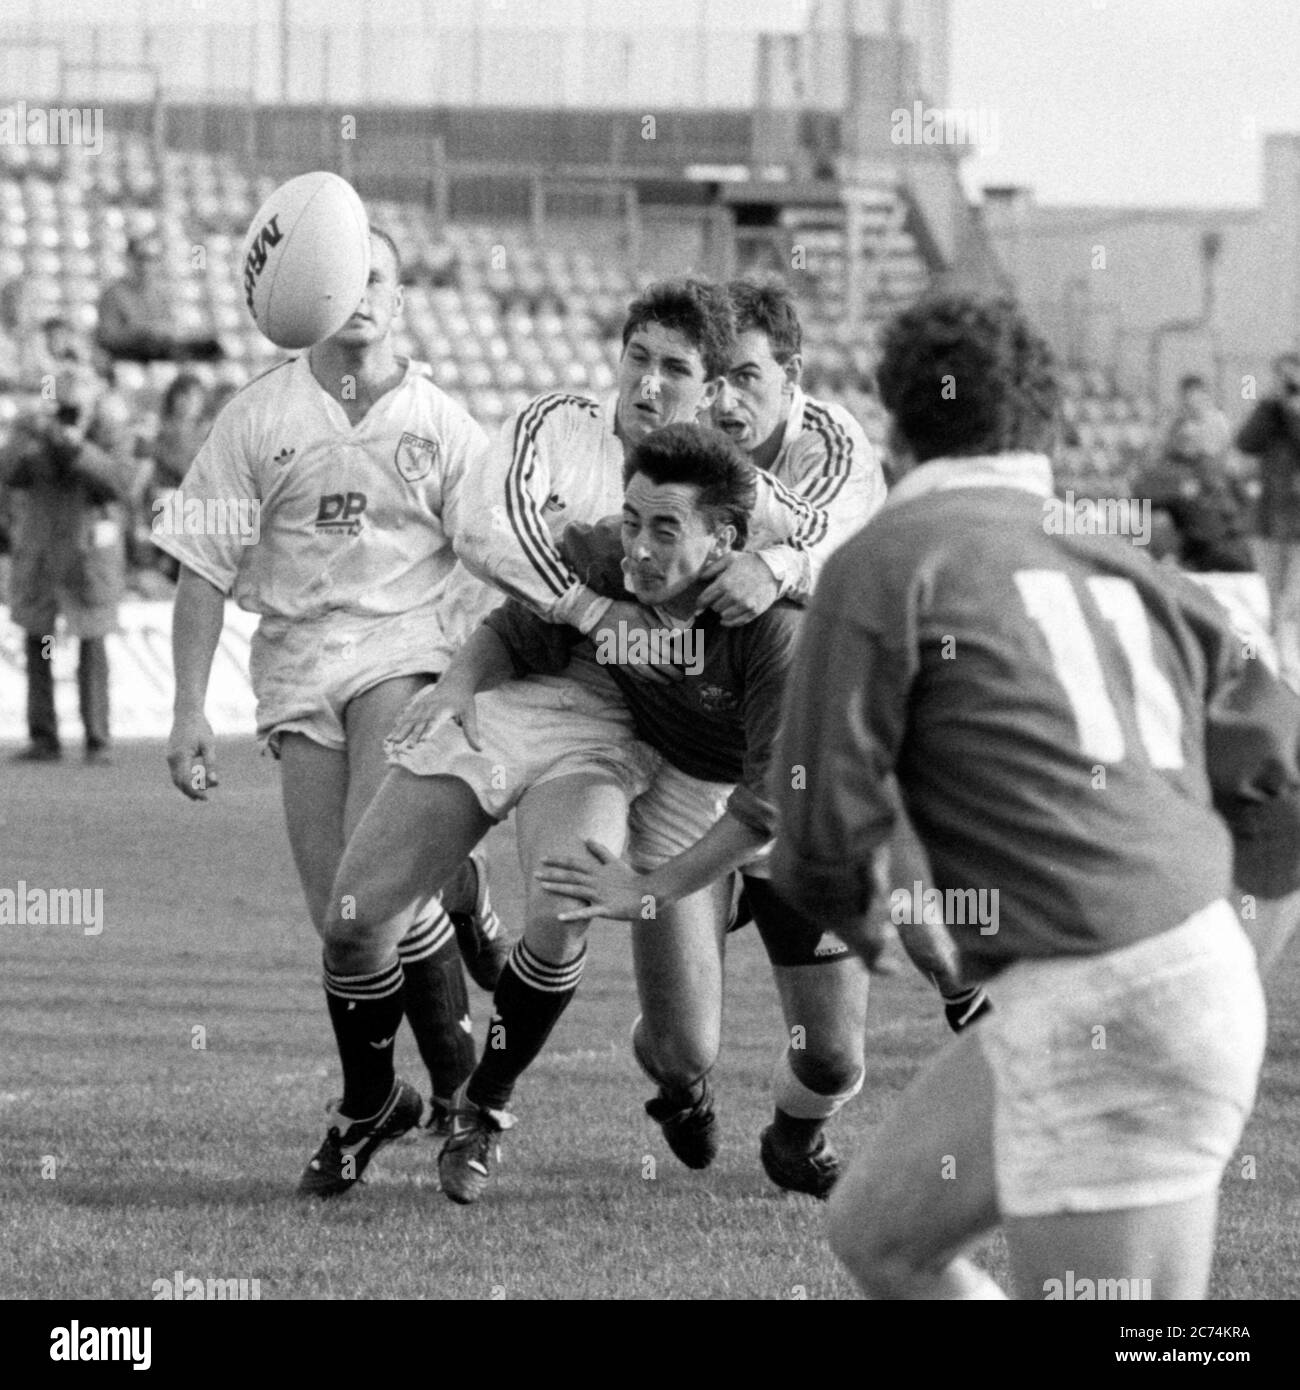 Swansea RFC scrum half Robert Jones gets to grips with Llanelli RFC centre Nigel Davies in a game held at St Helen's Cricket and Rugby Ground, Swansea, Wales on 14 October 1989. Stock Photo